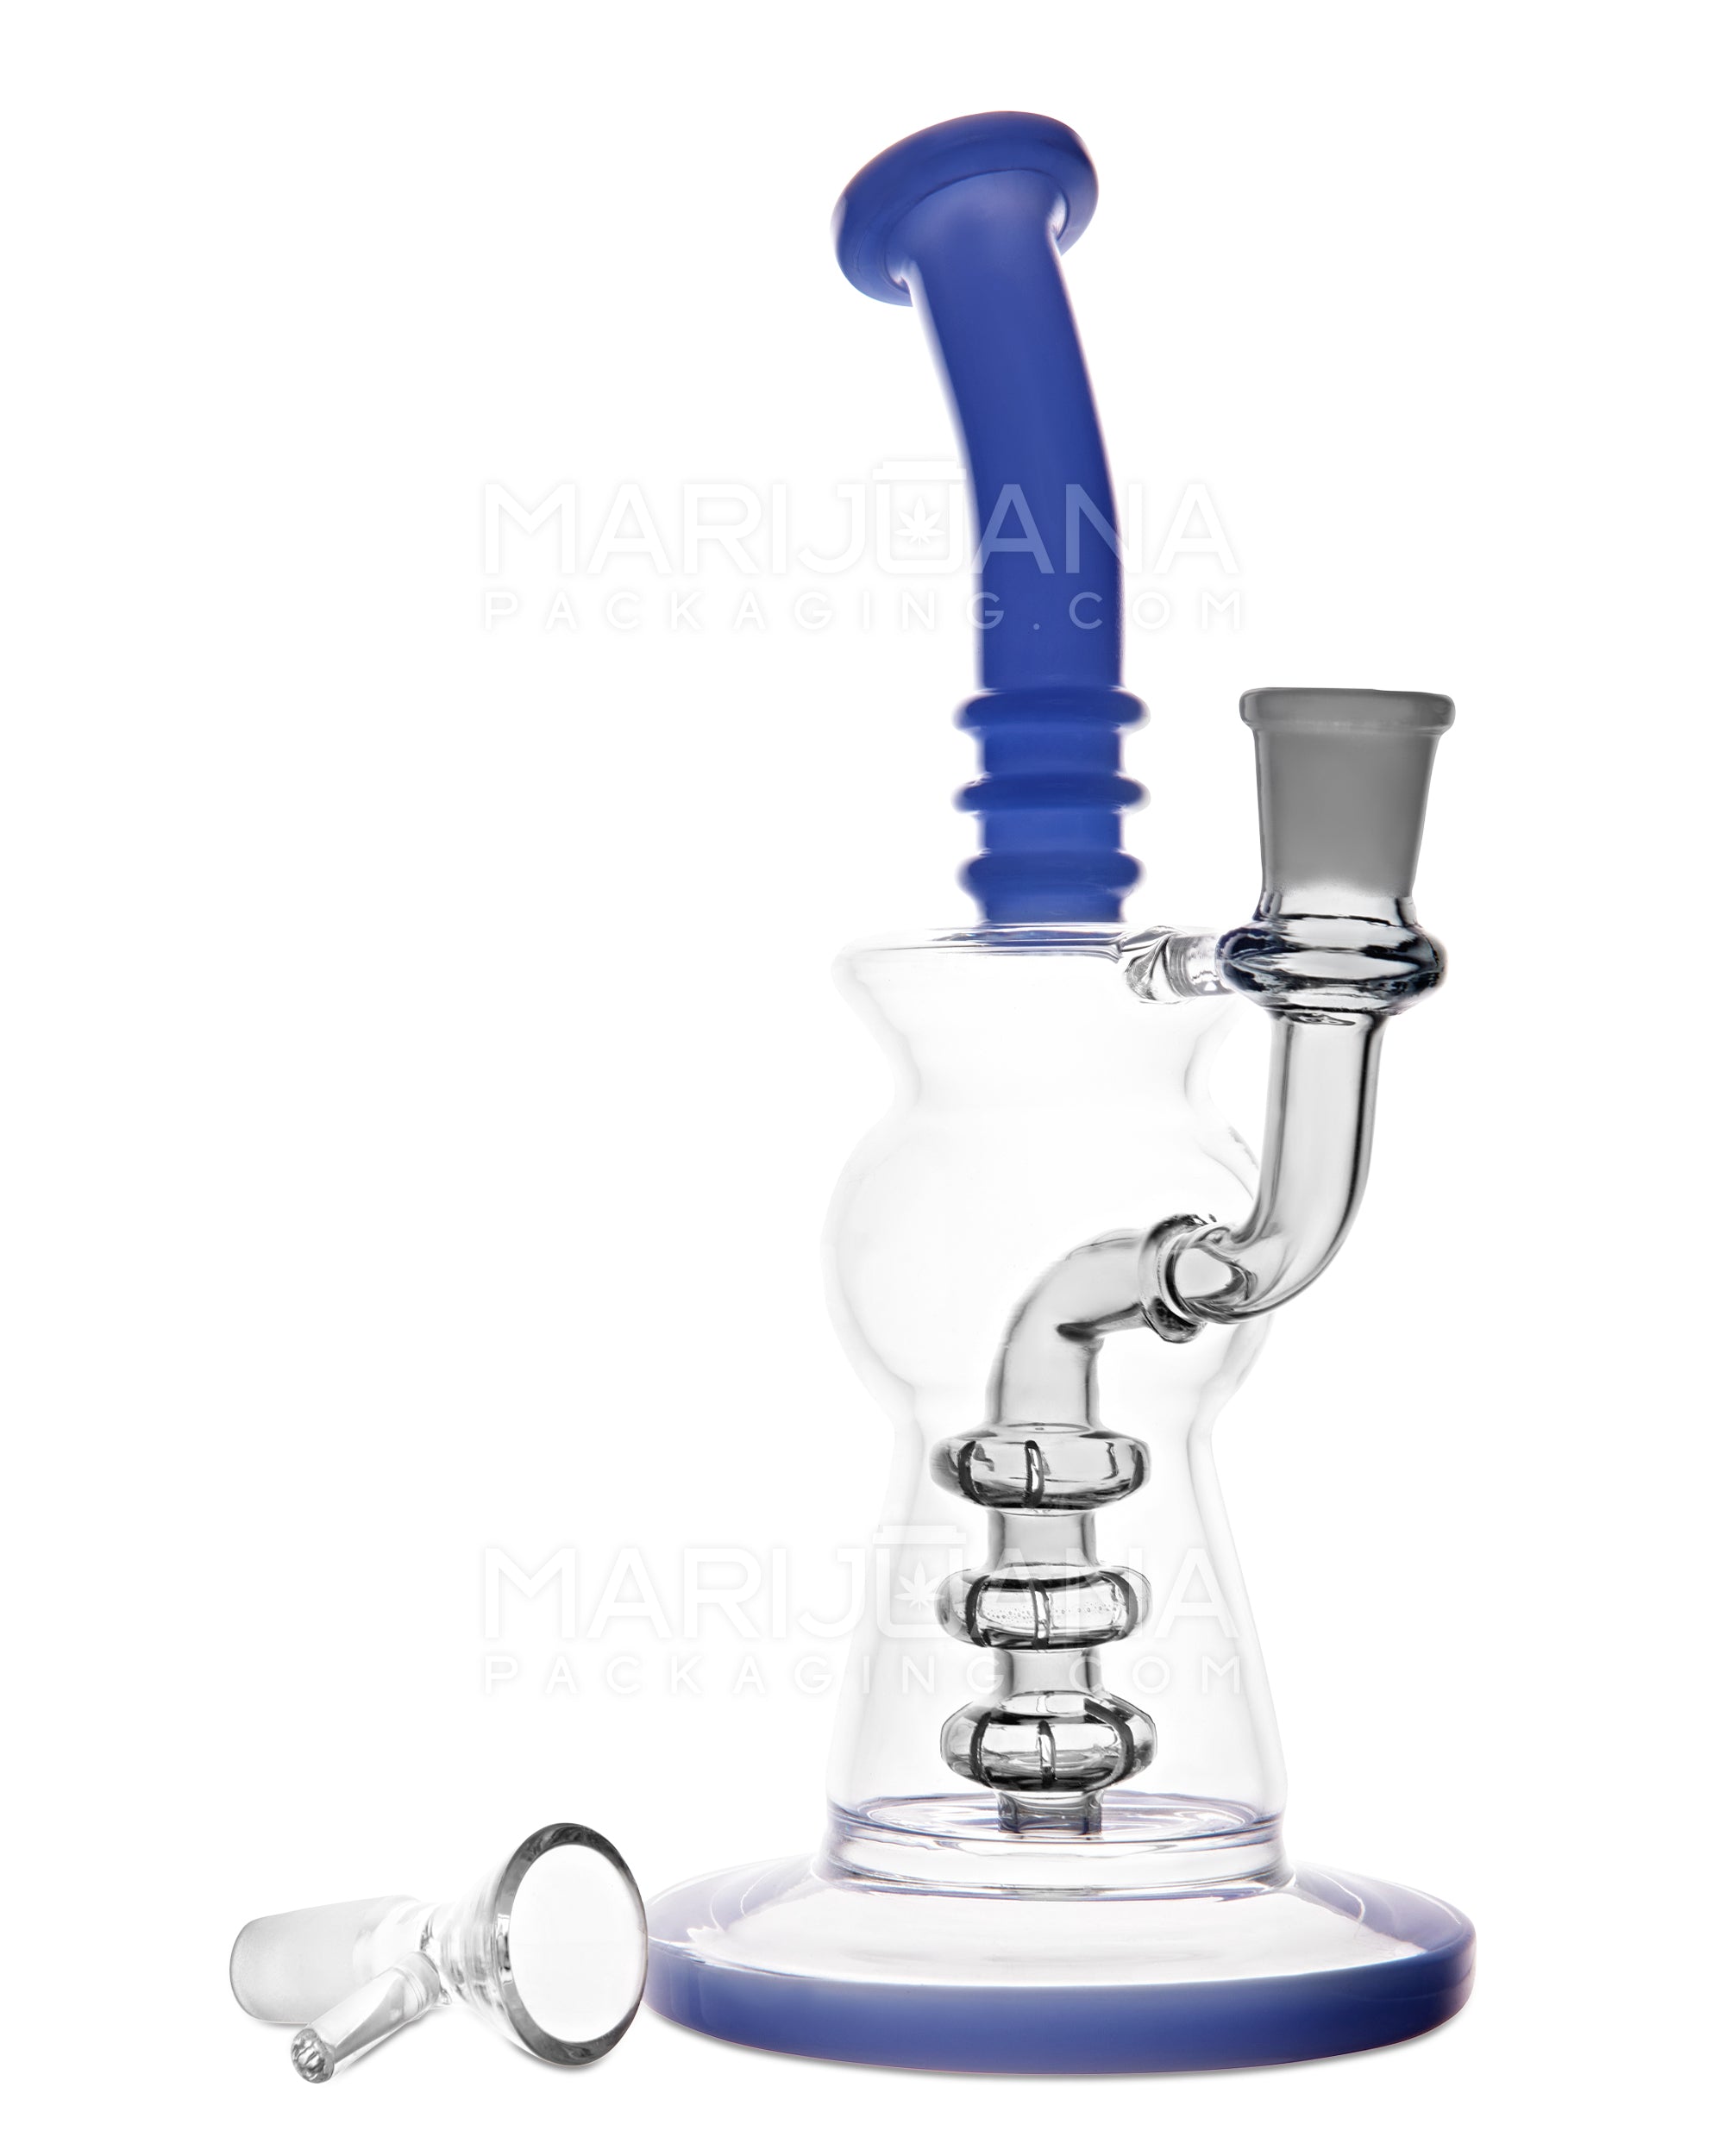 Bent Neck Ringed Triple Matrix Perc Glass Water Pipe w/ Thick Base | 8.5in Tall - 14mm Bowl - Blue - 2